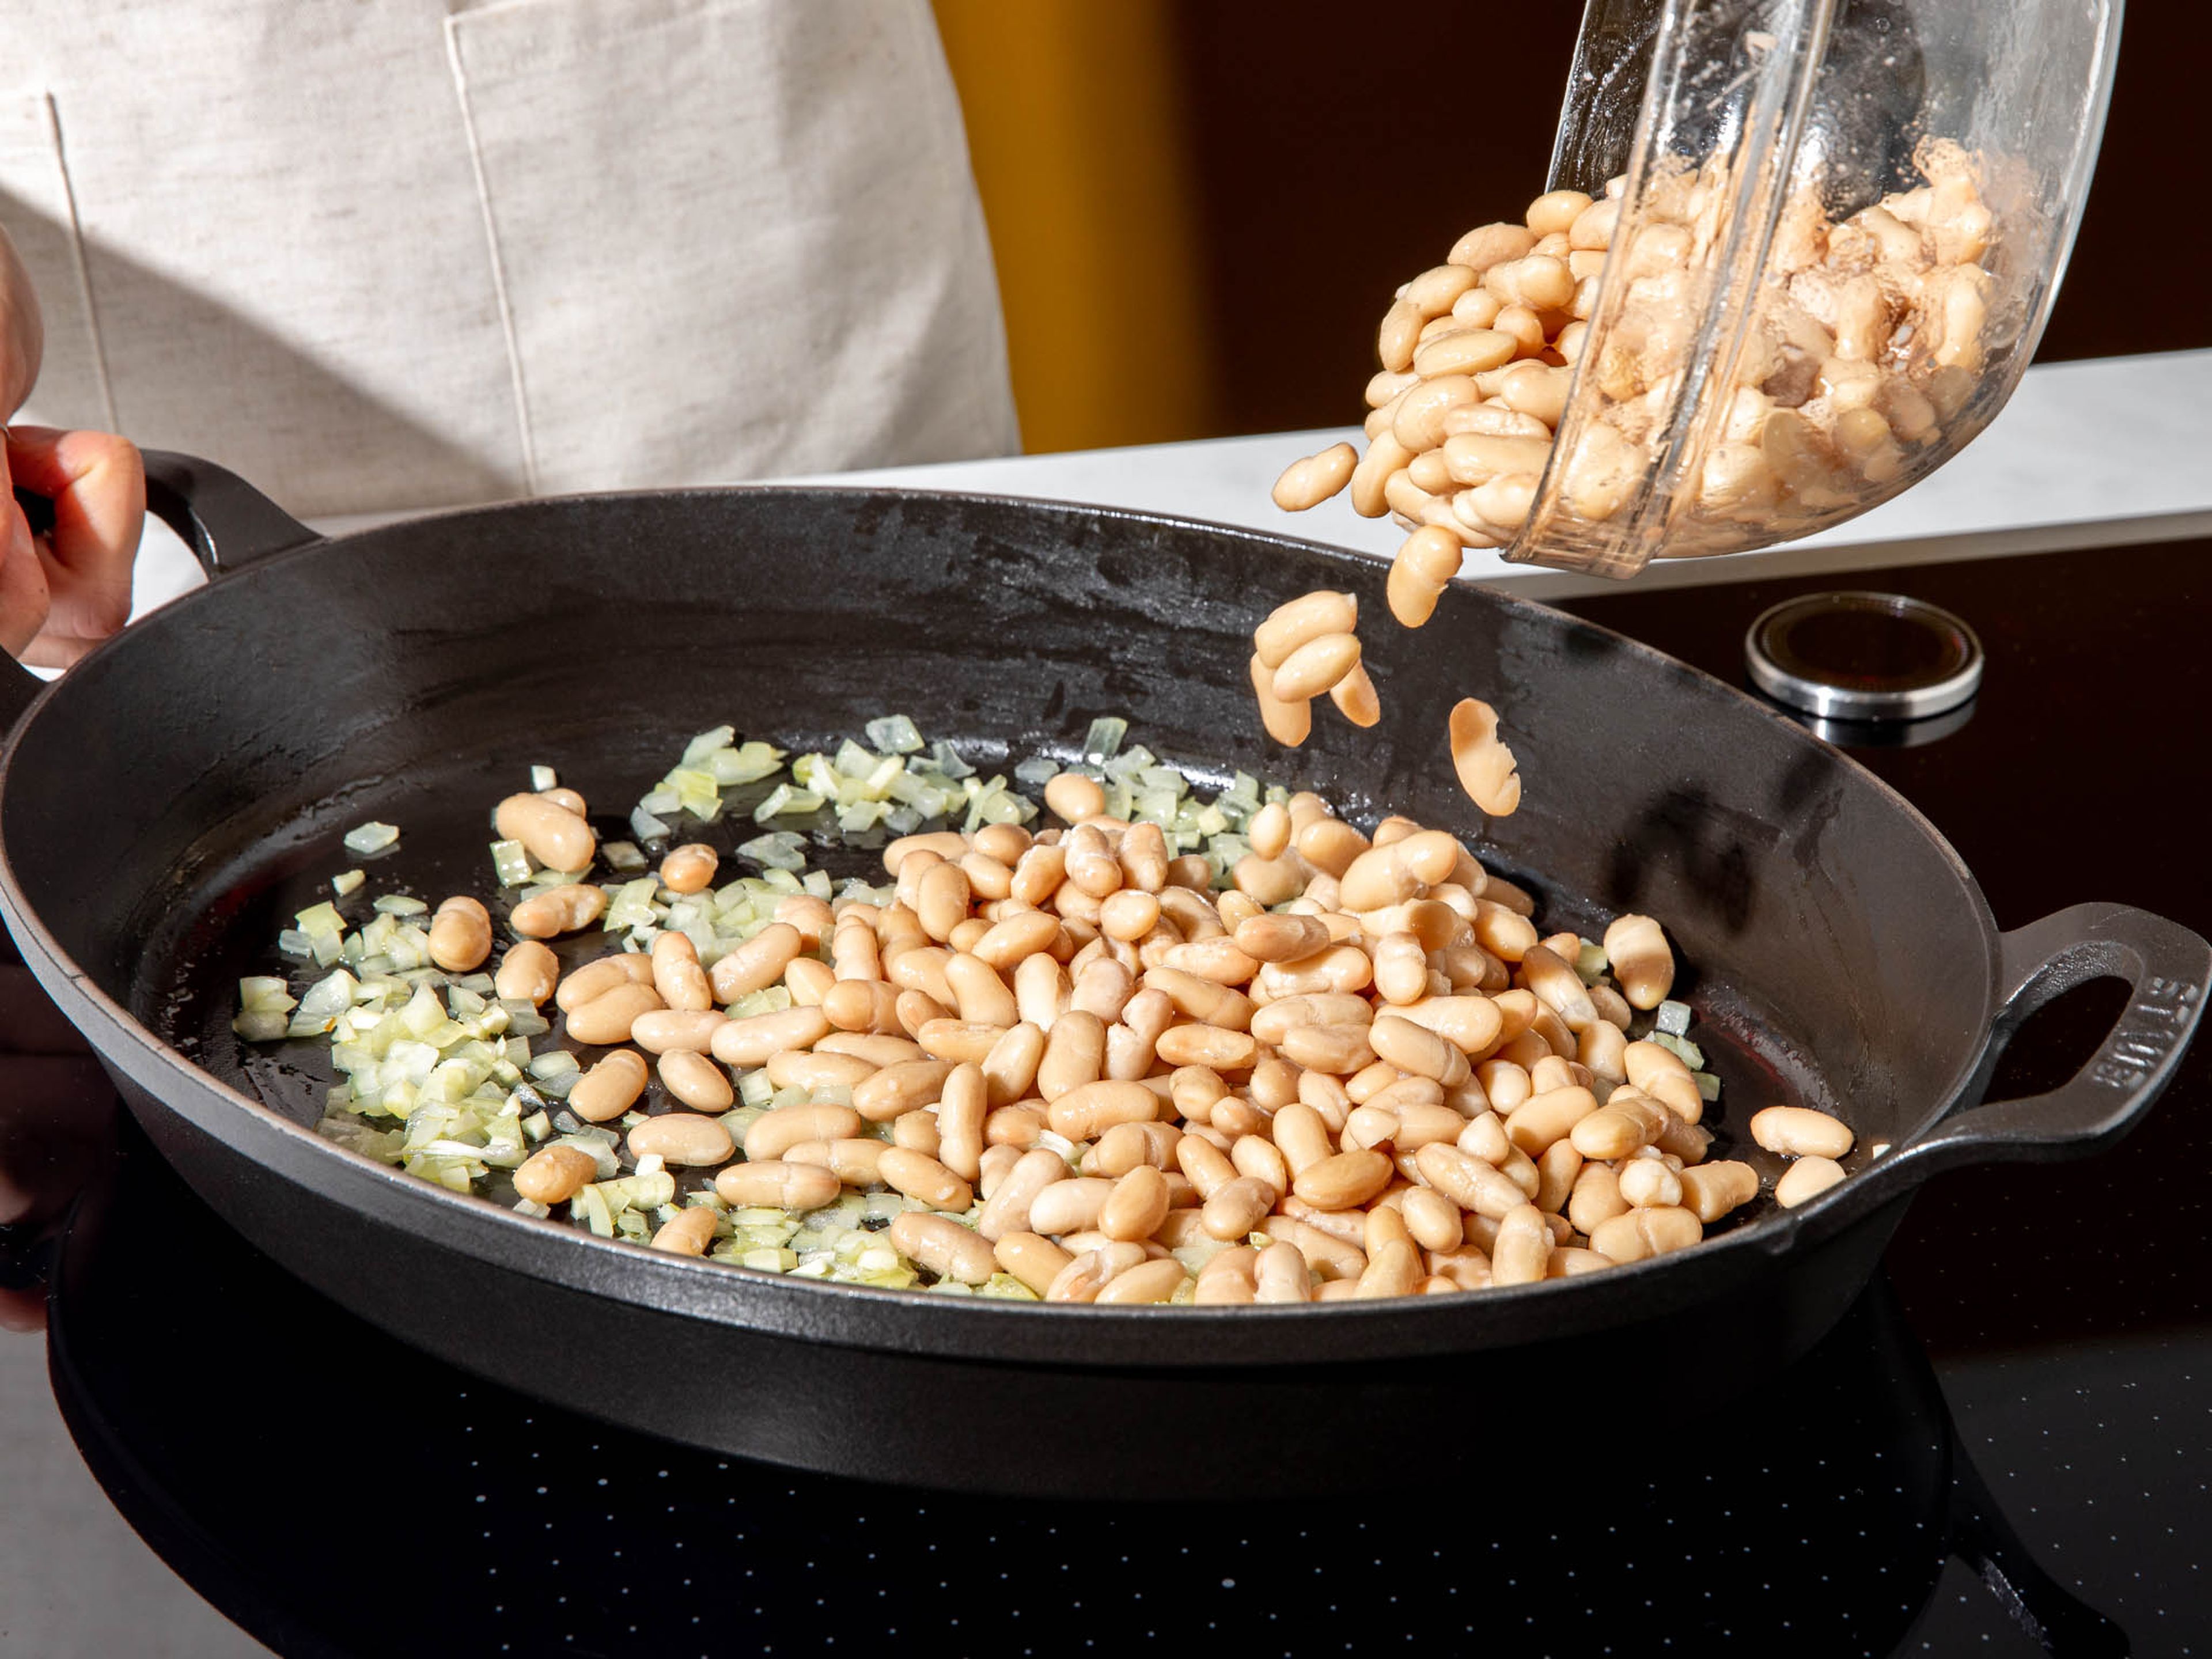 Add some olive oil to a frying pan or ovenproof dish. Then add garlic and onion and sauté until glossy. Add the beans and tomato paste, and cook briefly. Stir in the canned crushed tomatoes and Worcestershire sauce and bring everything to a boil. Season to taste with salt and pepper.